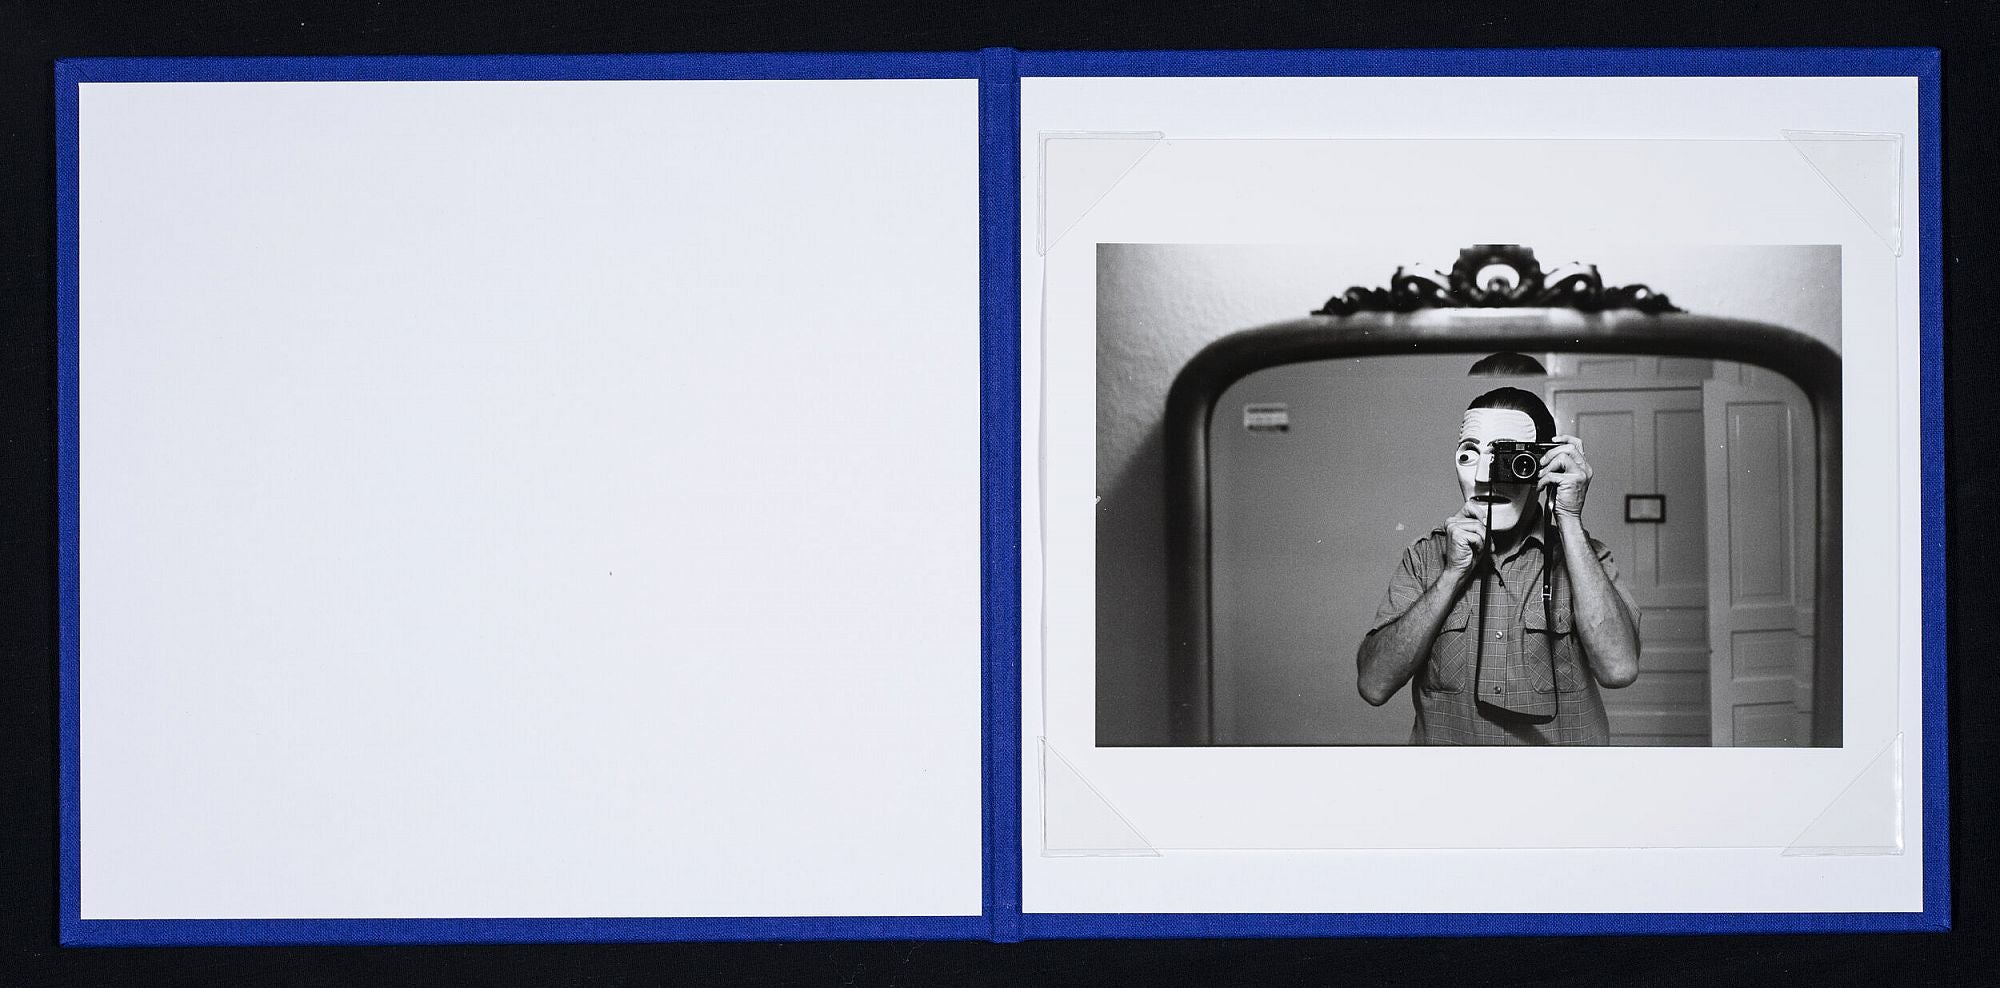 Lee Friedlander: Friedlander First Fifty, The Complete Collection, Limited Edition (with Gelatin Silver Print) [SIGNED]